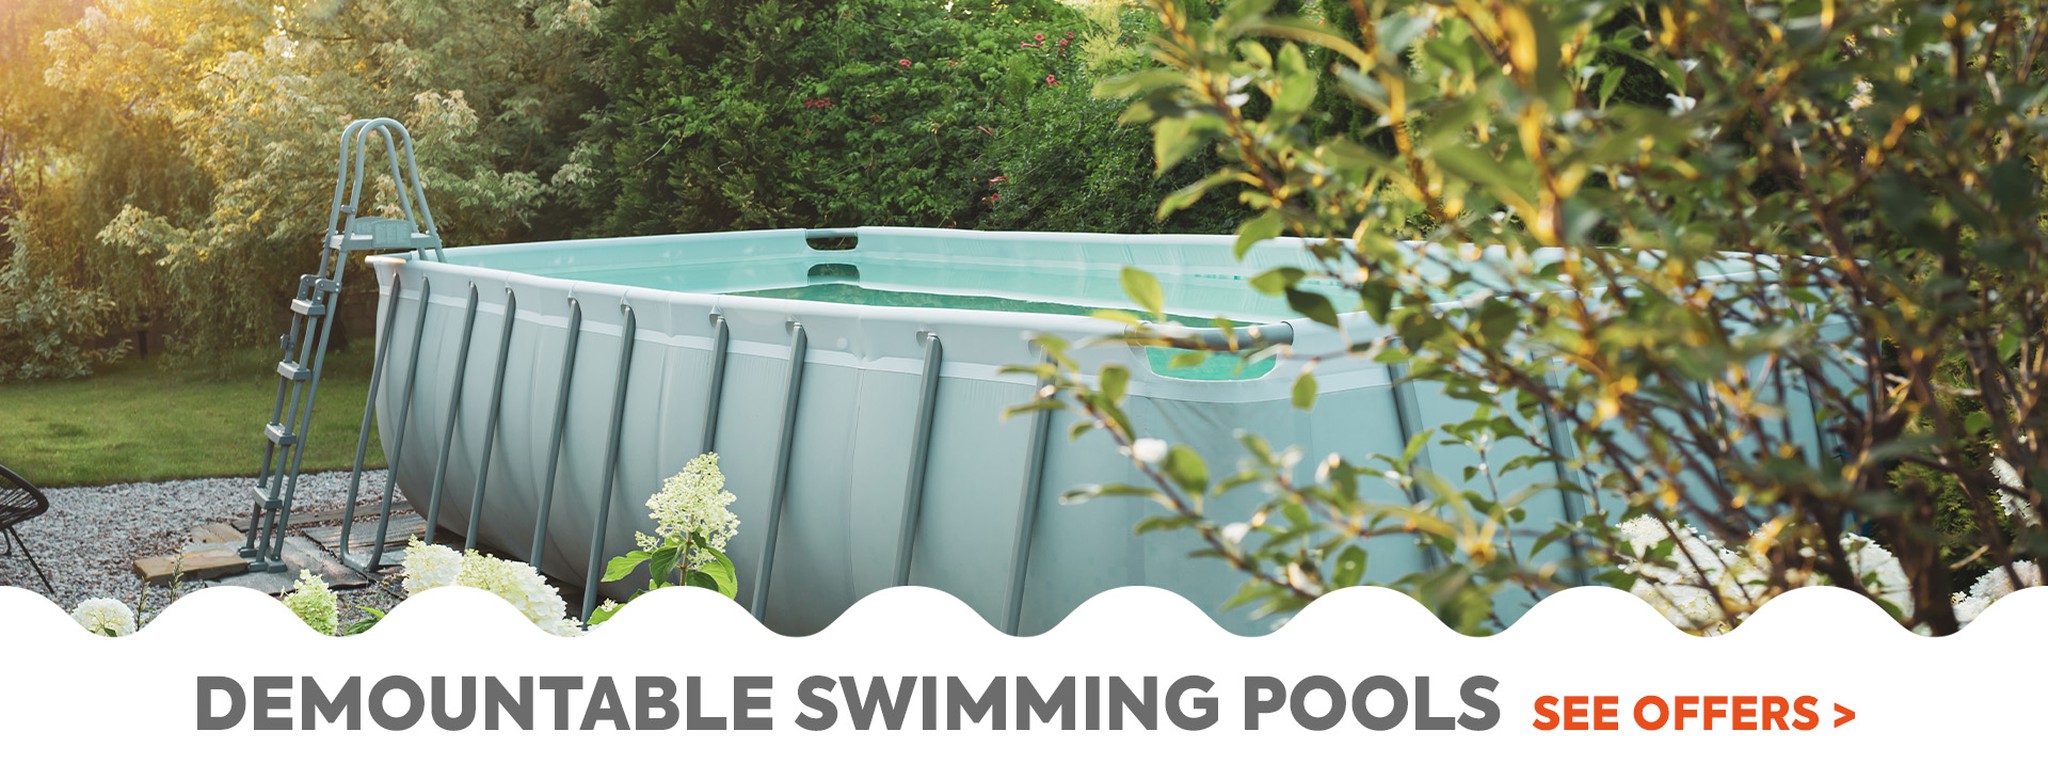 Discover our range of removable pools at the best price for hours of fun in your garden this summer.